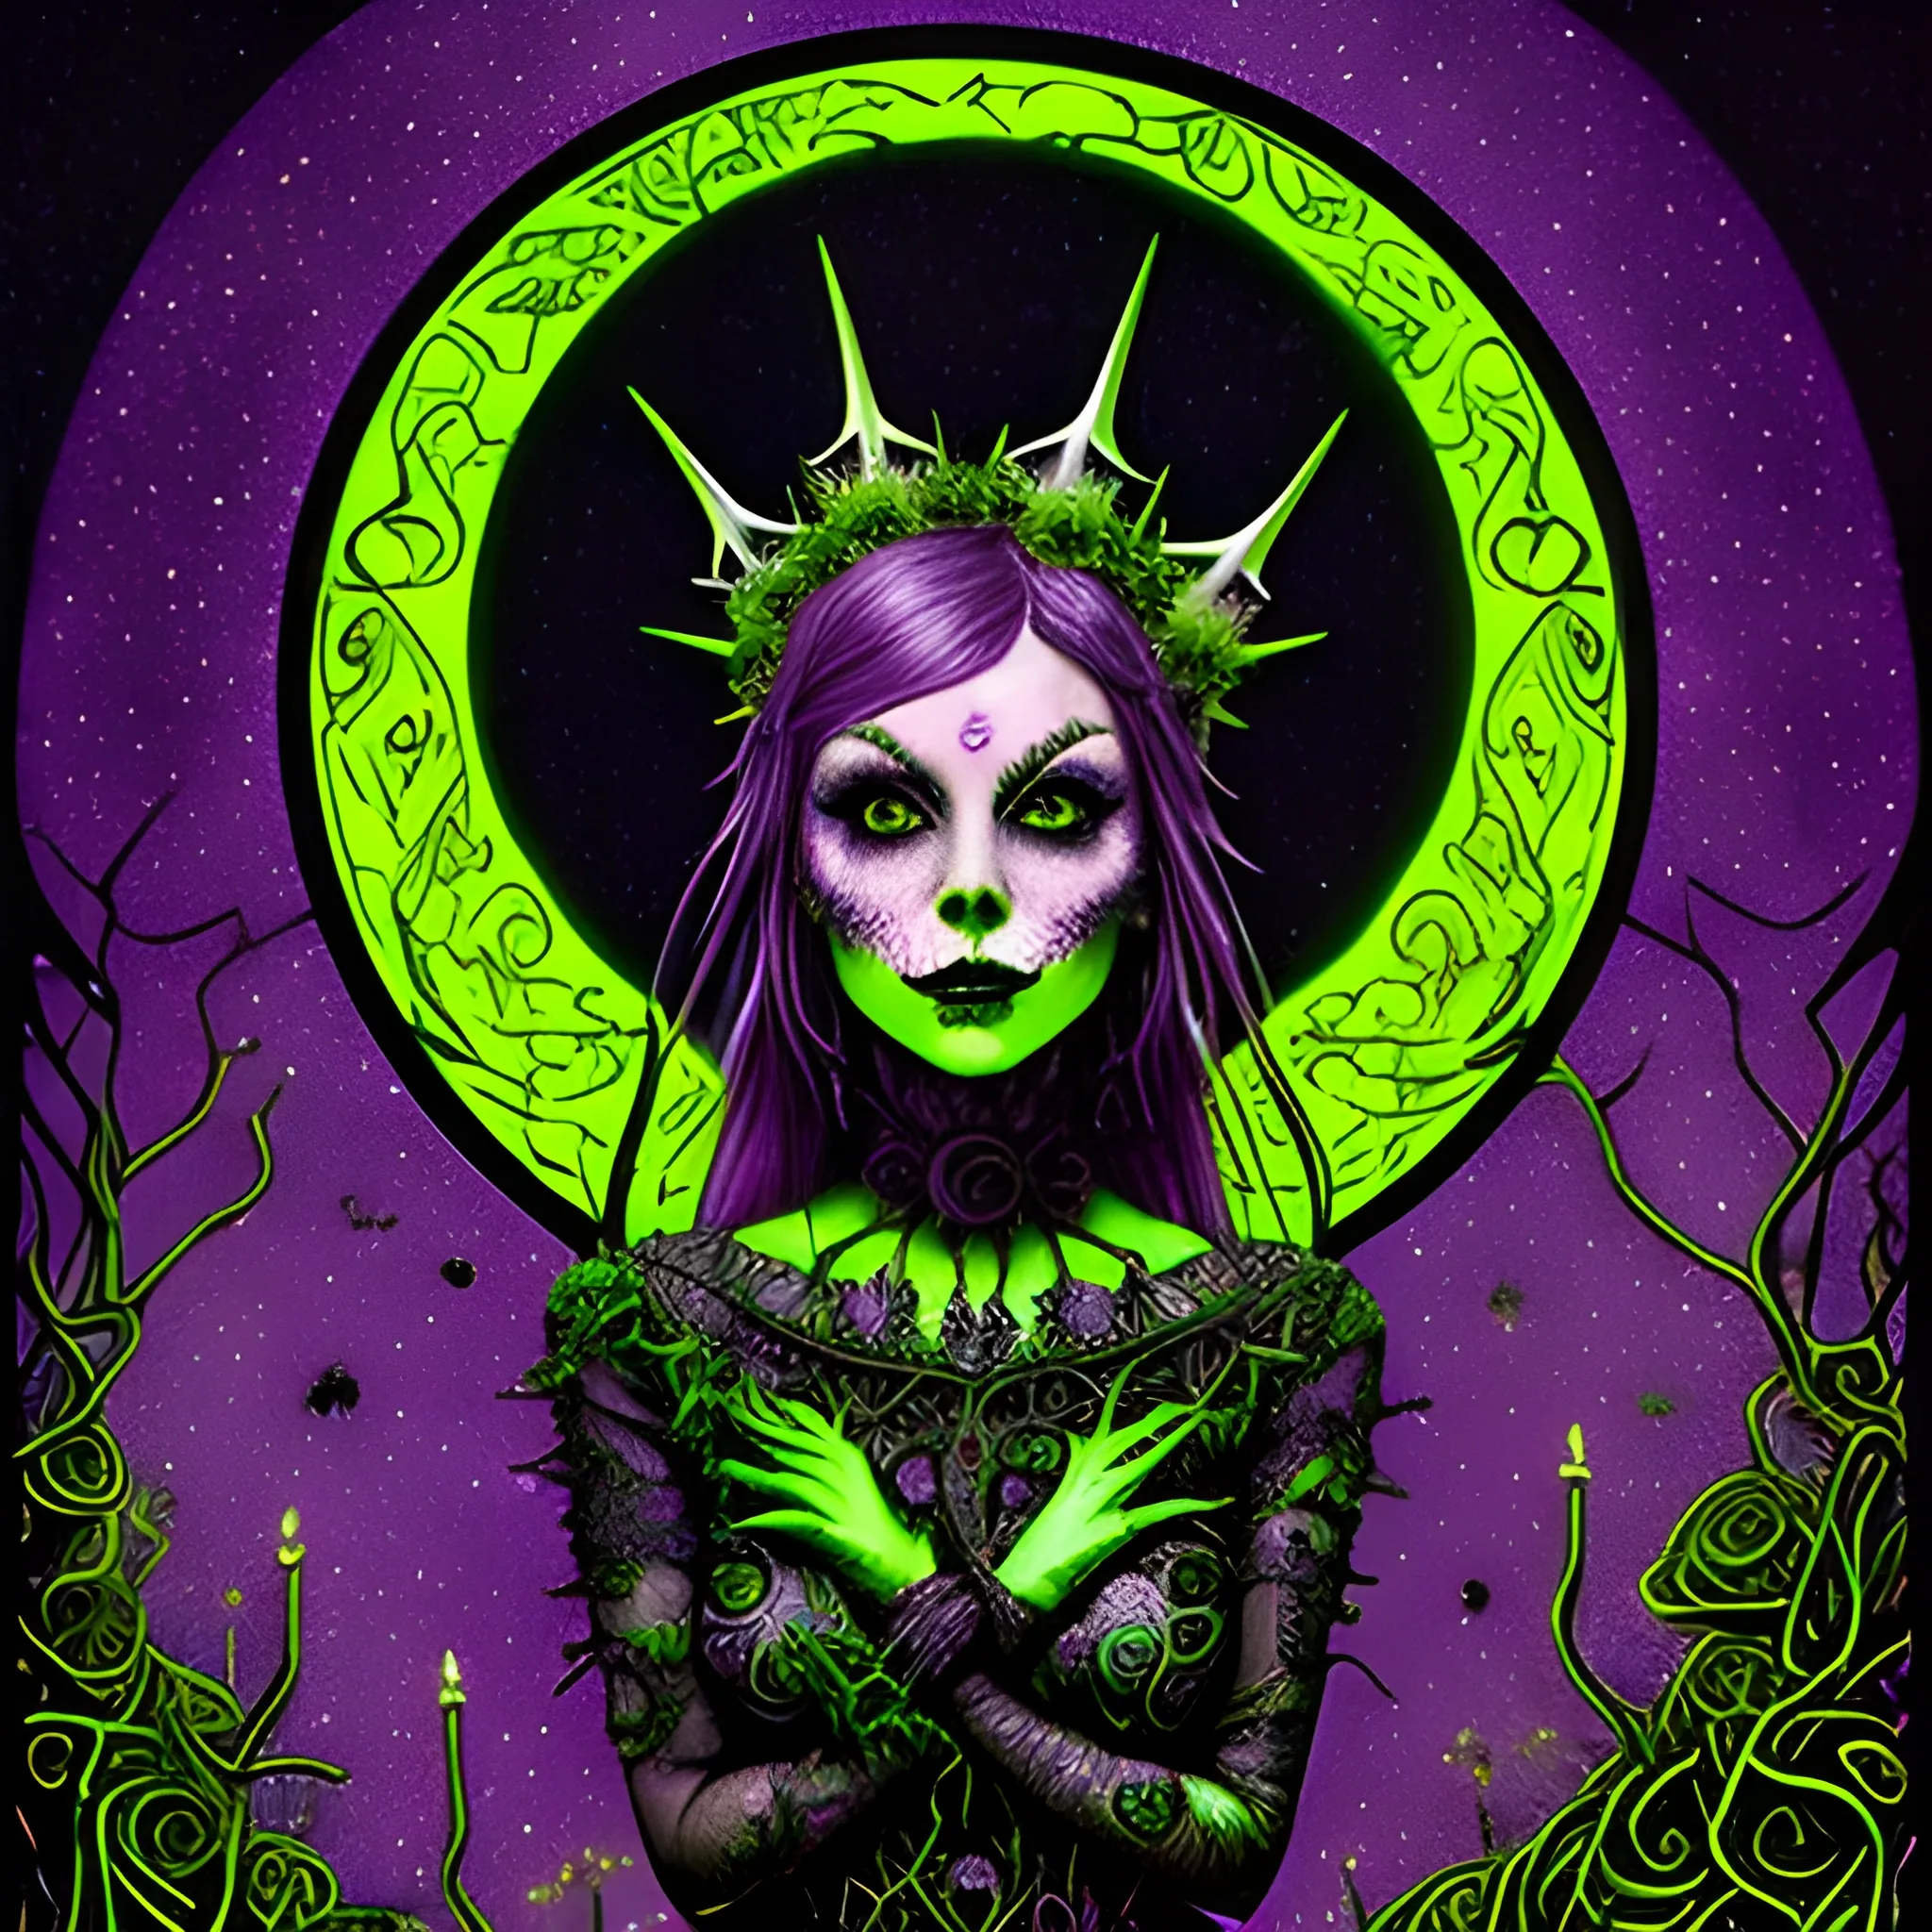 a woman wearing a thorny crown of black roses and weeping black tears, Halloween, bats, full moon in a nebula sky; perfect purple pumpkins, green skulls, orange bats, magic, candles, cobweb, spider, neon spray paint, acrylic paint, fantastical surrealist world, in the style of Stephen Gammell, extremely detailed Zentangle style, sick, gothic, eldritch, glitter, luminous color sparkles, dayglo orange, neon grape purple, chartreuse green, Halloween; Nyx Goddess of the Night with a crescent moon and many stars in the style of Maxfield Parrish, starry night, James R. Eads